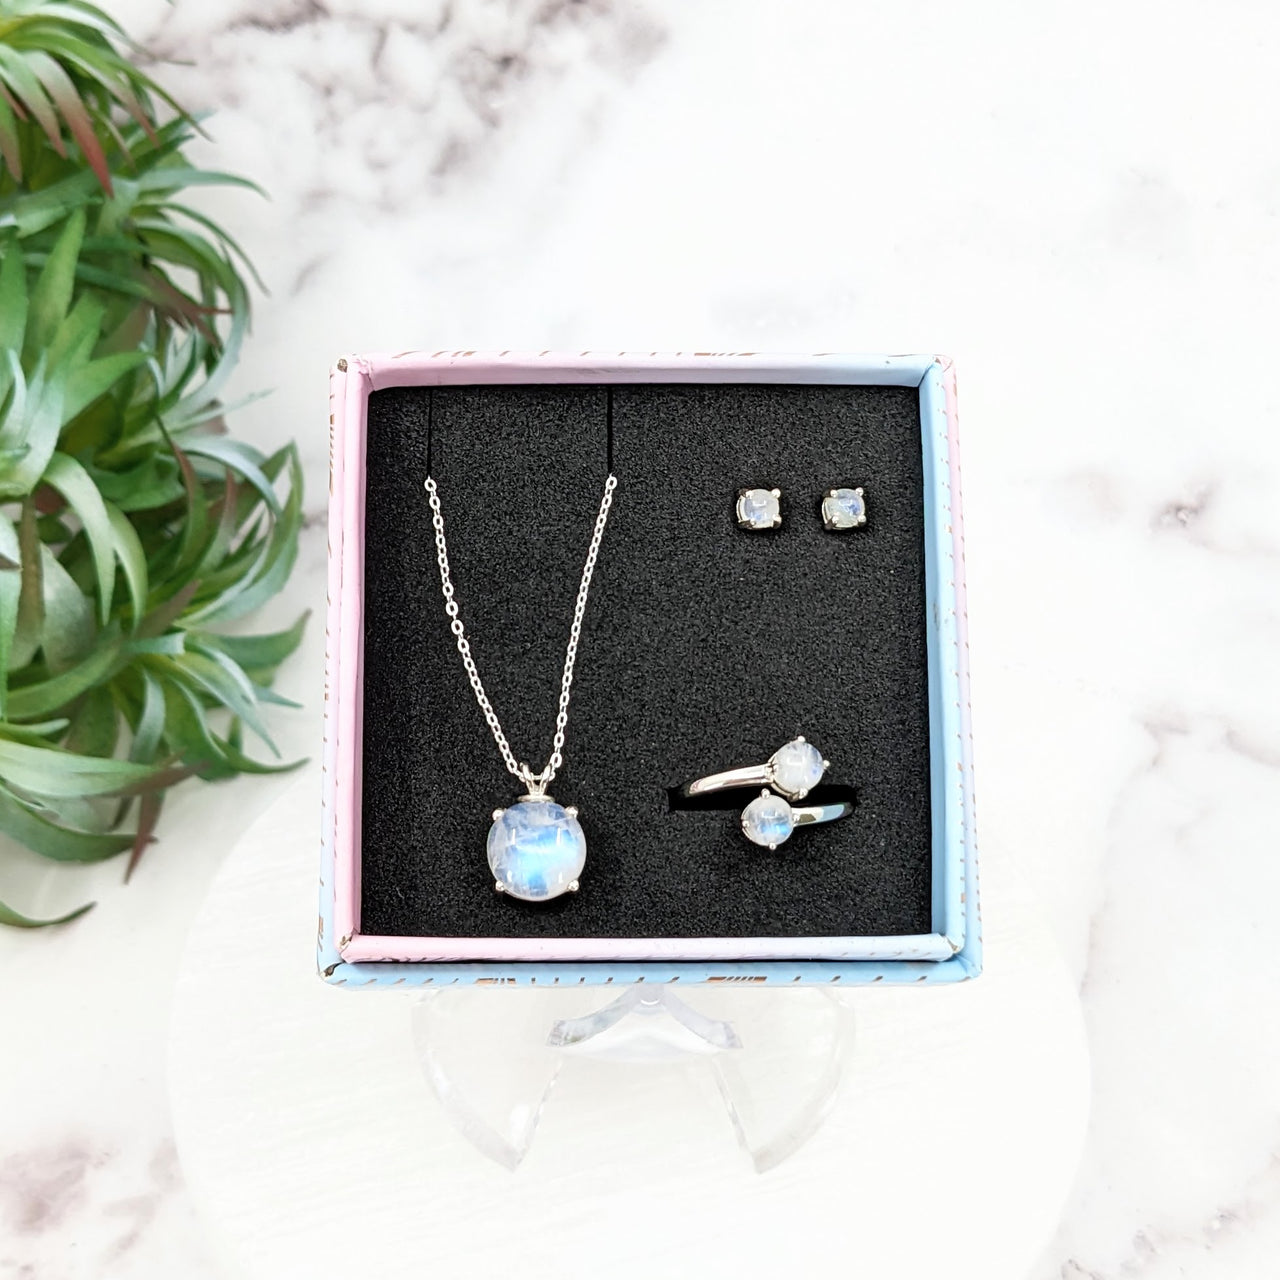 Moonstone Polished Jewelry 3 pc Box Set Sterling Silver Earrings, Pendant, Adjustable Ring  #LV3200